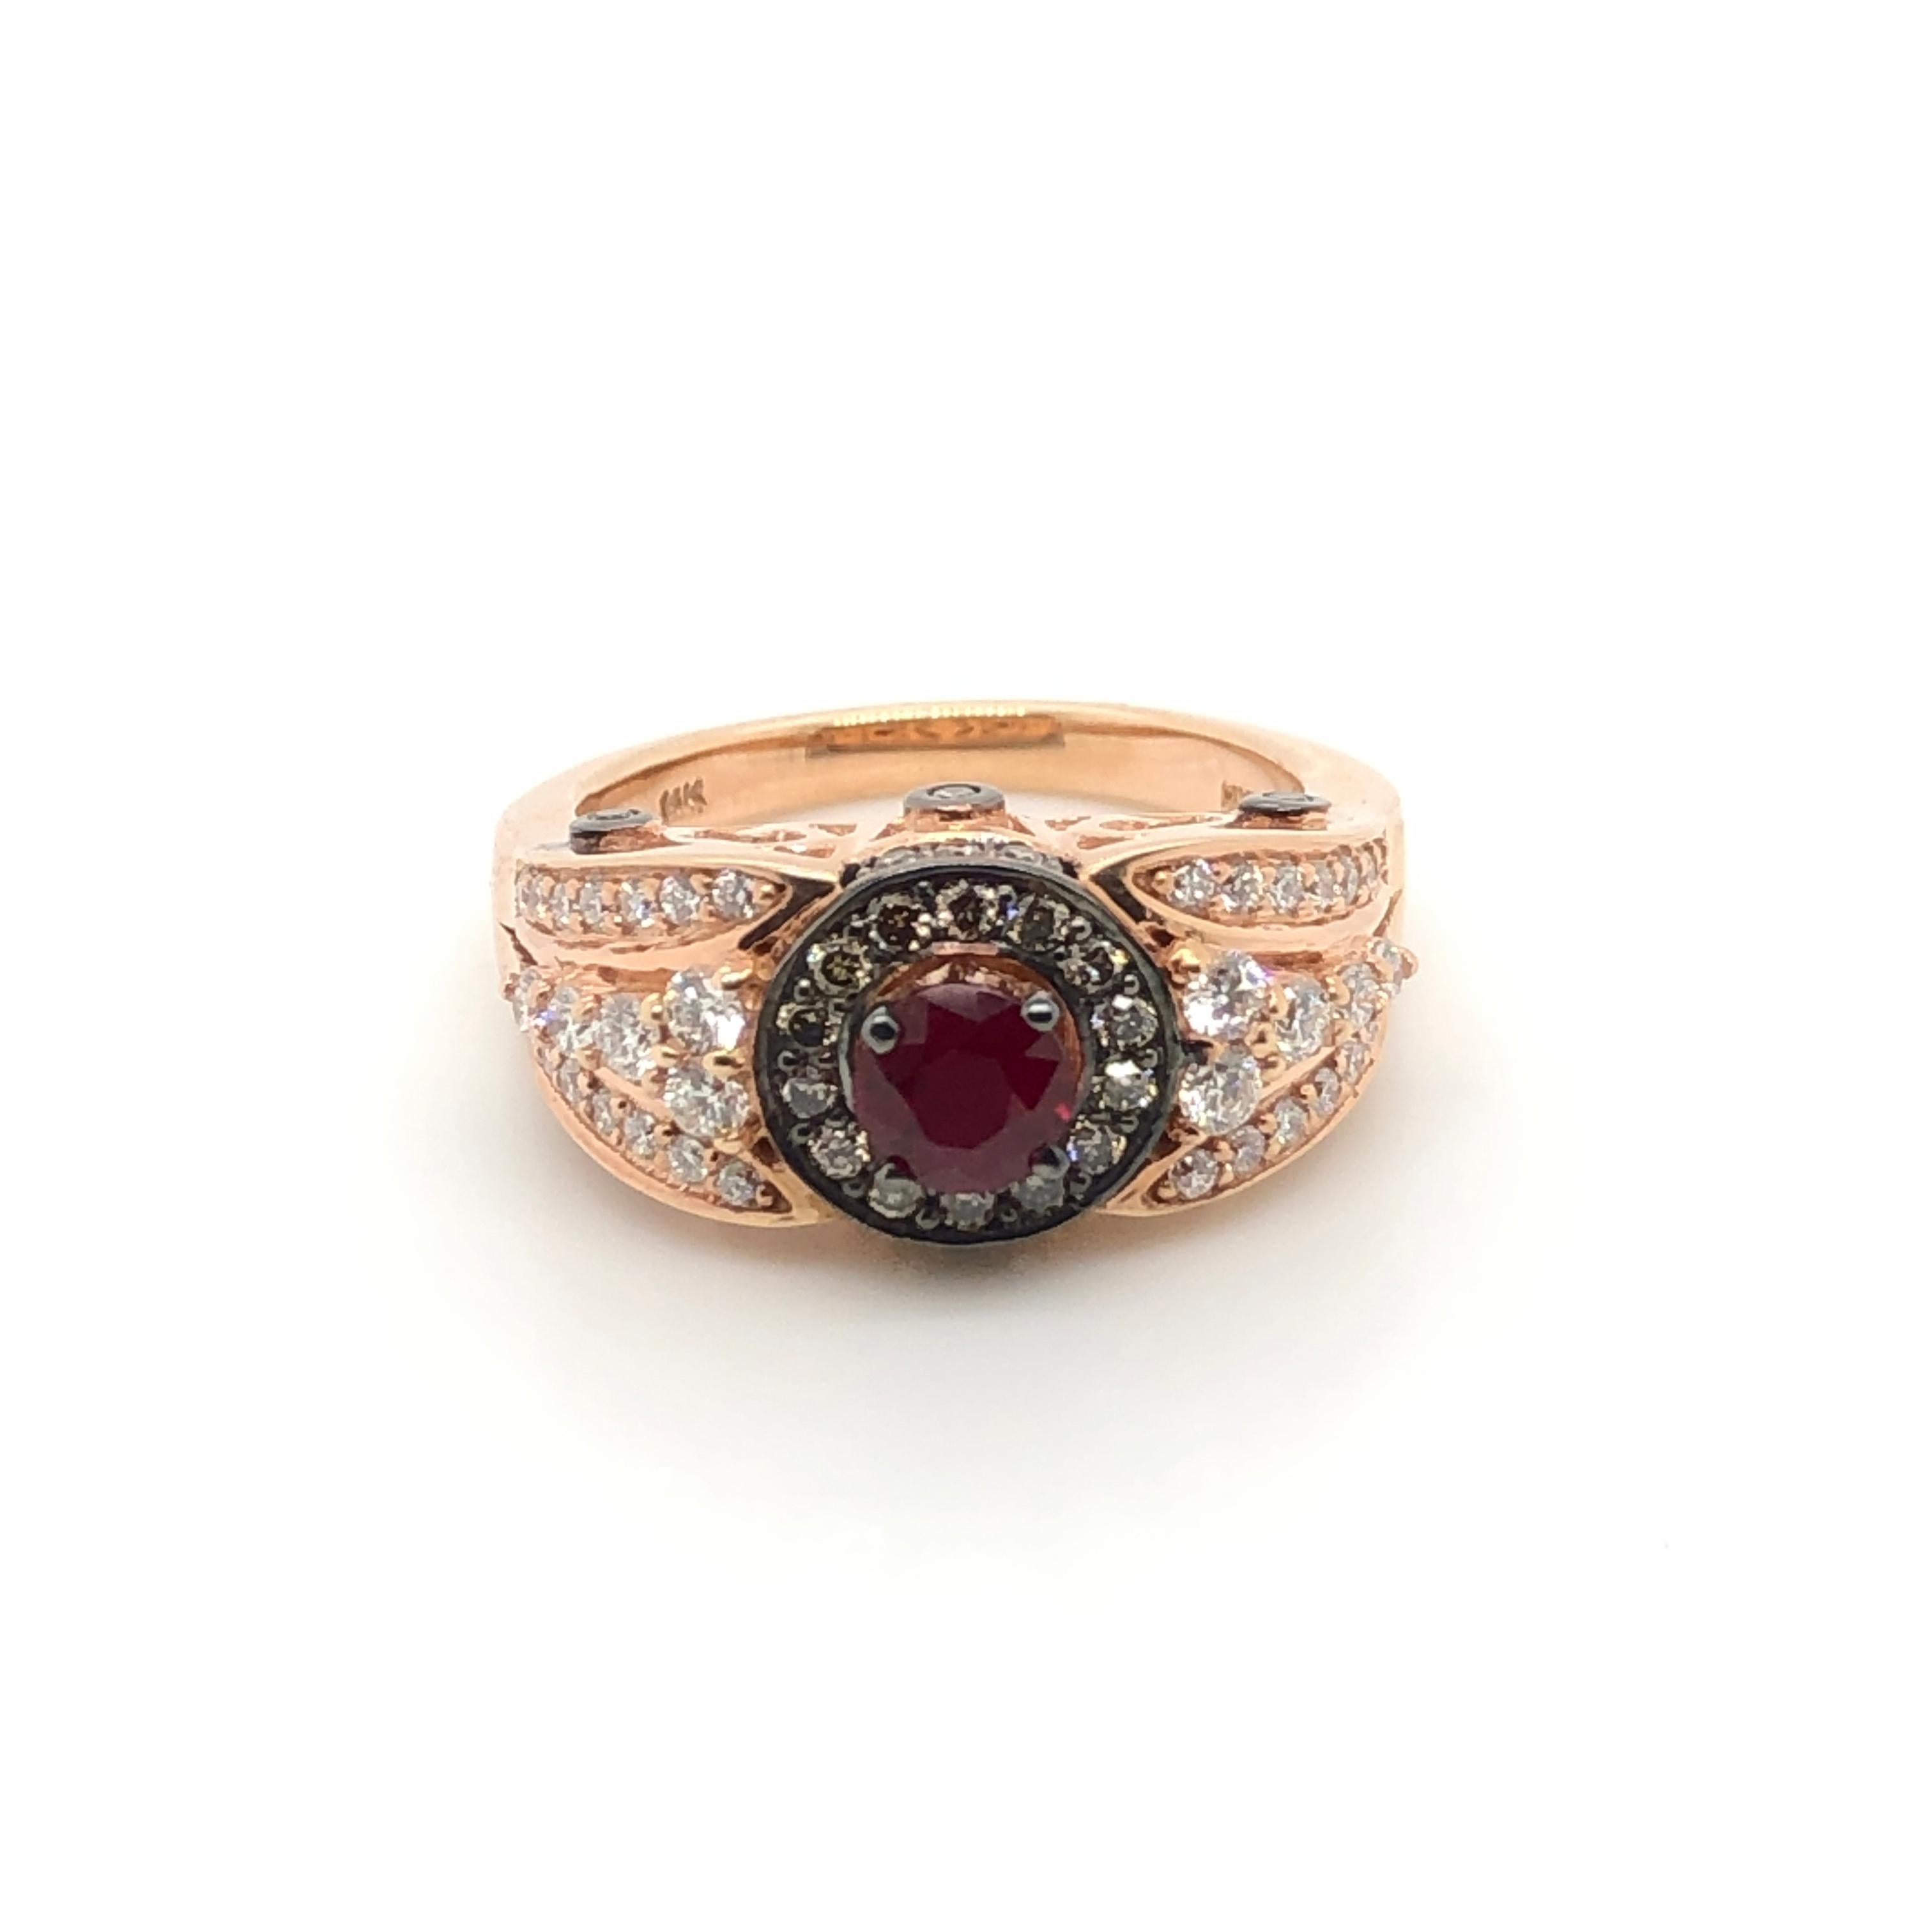 This Le Vian Bridal ring in 14k rose gold stands out with its 1/2 carat Ruby center surrounded by 1/4 ct t.w. Chocolate Diamonds and 1/2 ct t.w. Vanilla Diamonds. 
Ring Size: 7